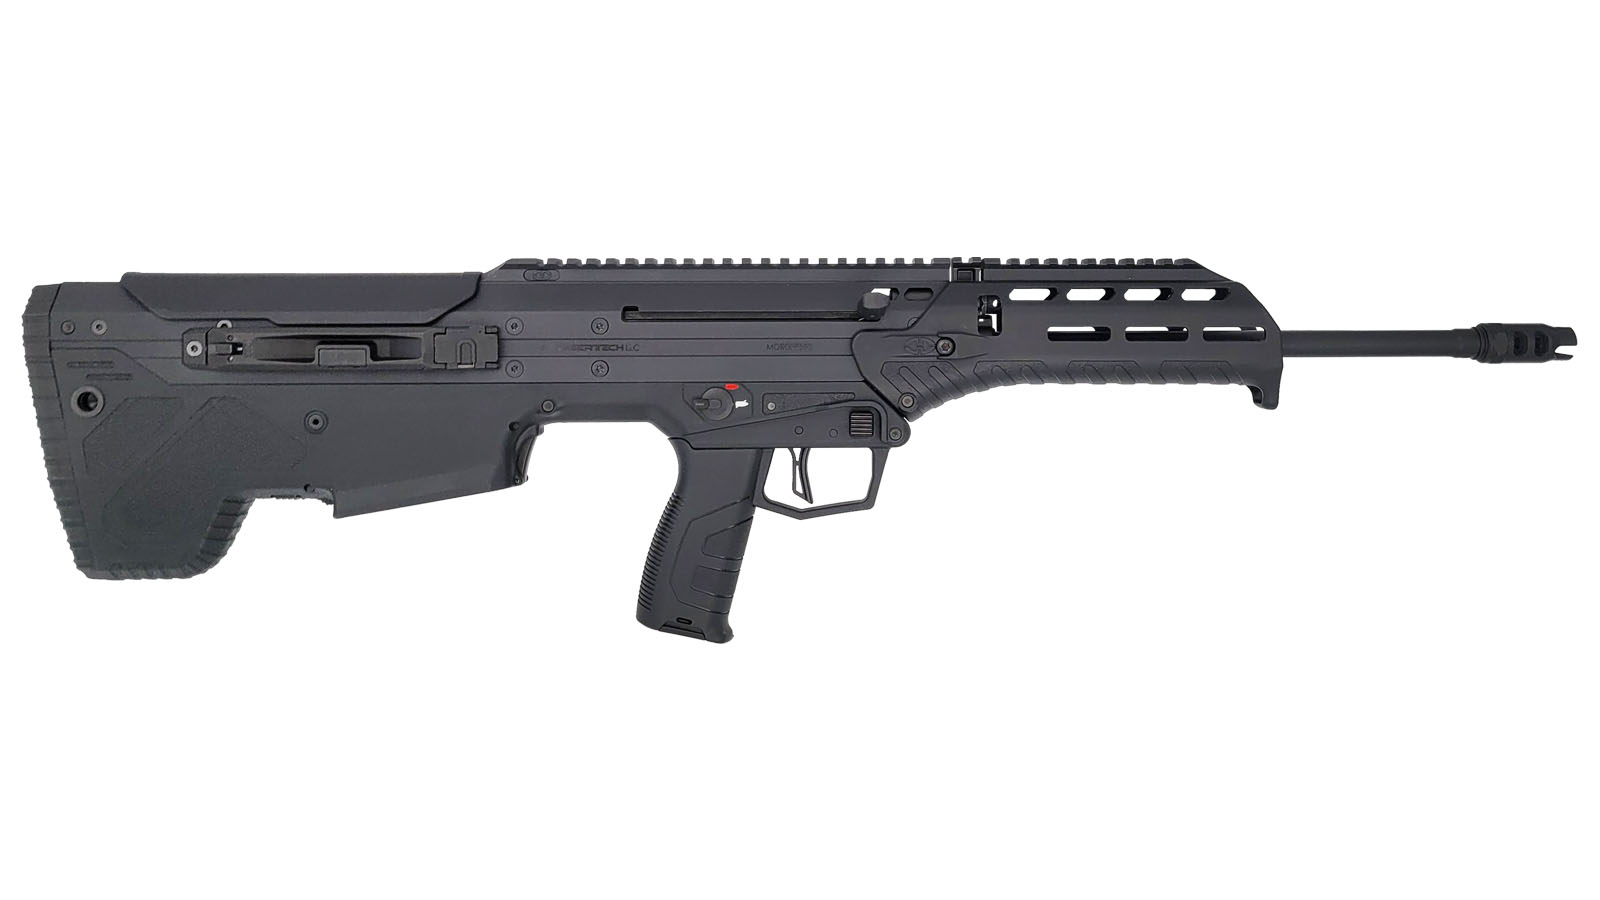 MDRx Rifle, 556NATO 223Rem 20" 10rd Forward-Ejection BLK